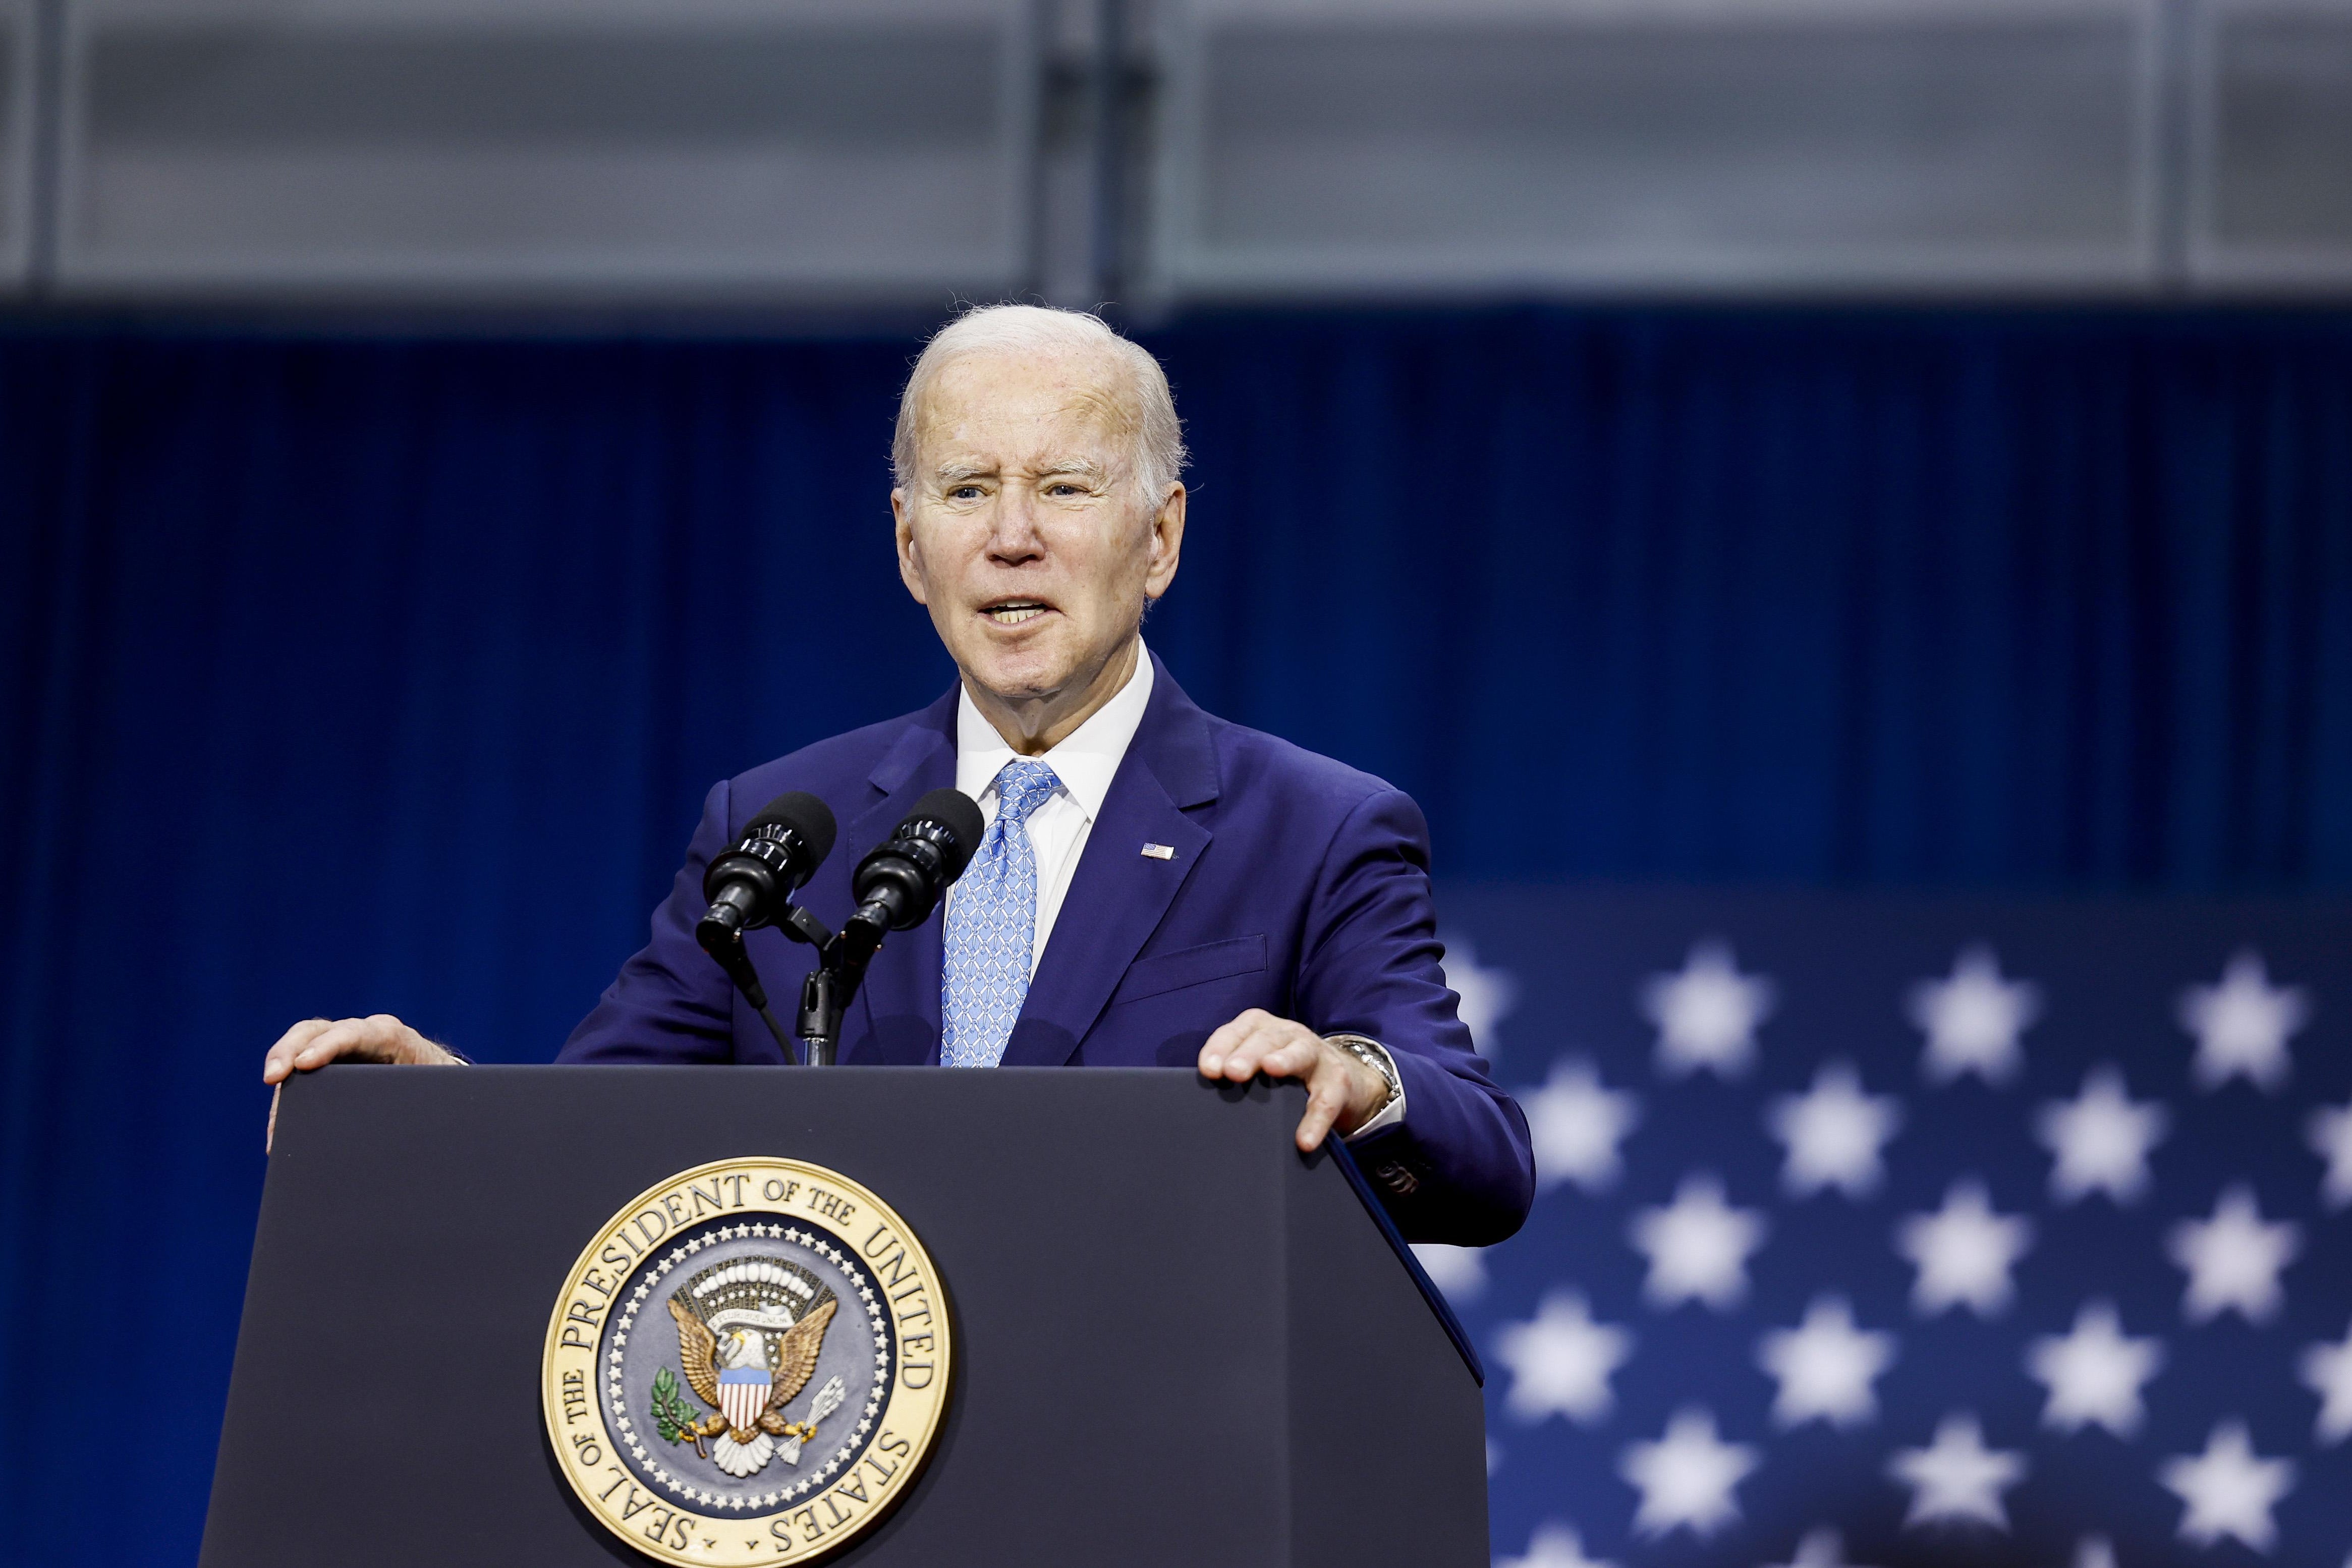 U.S. President Joe Biden delivers remarks, with his hands on a lectern, in Virginia Beach.